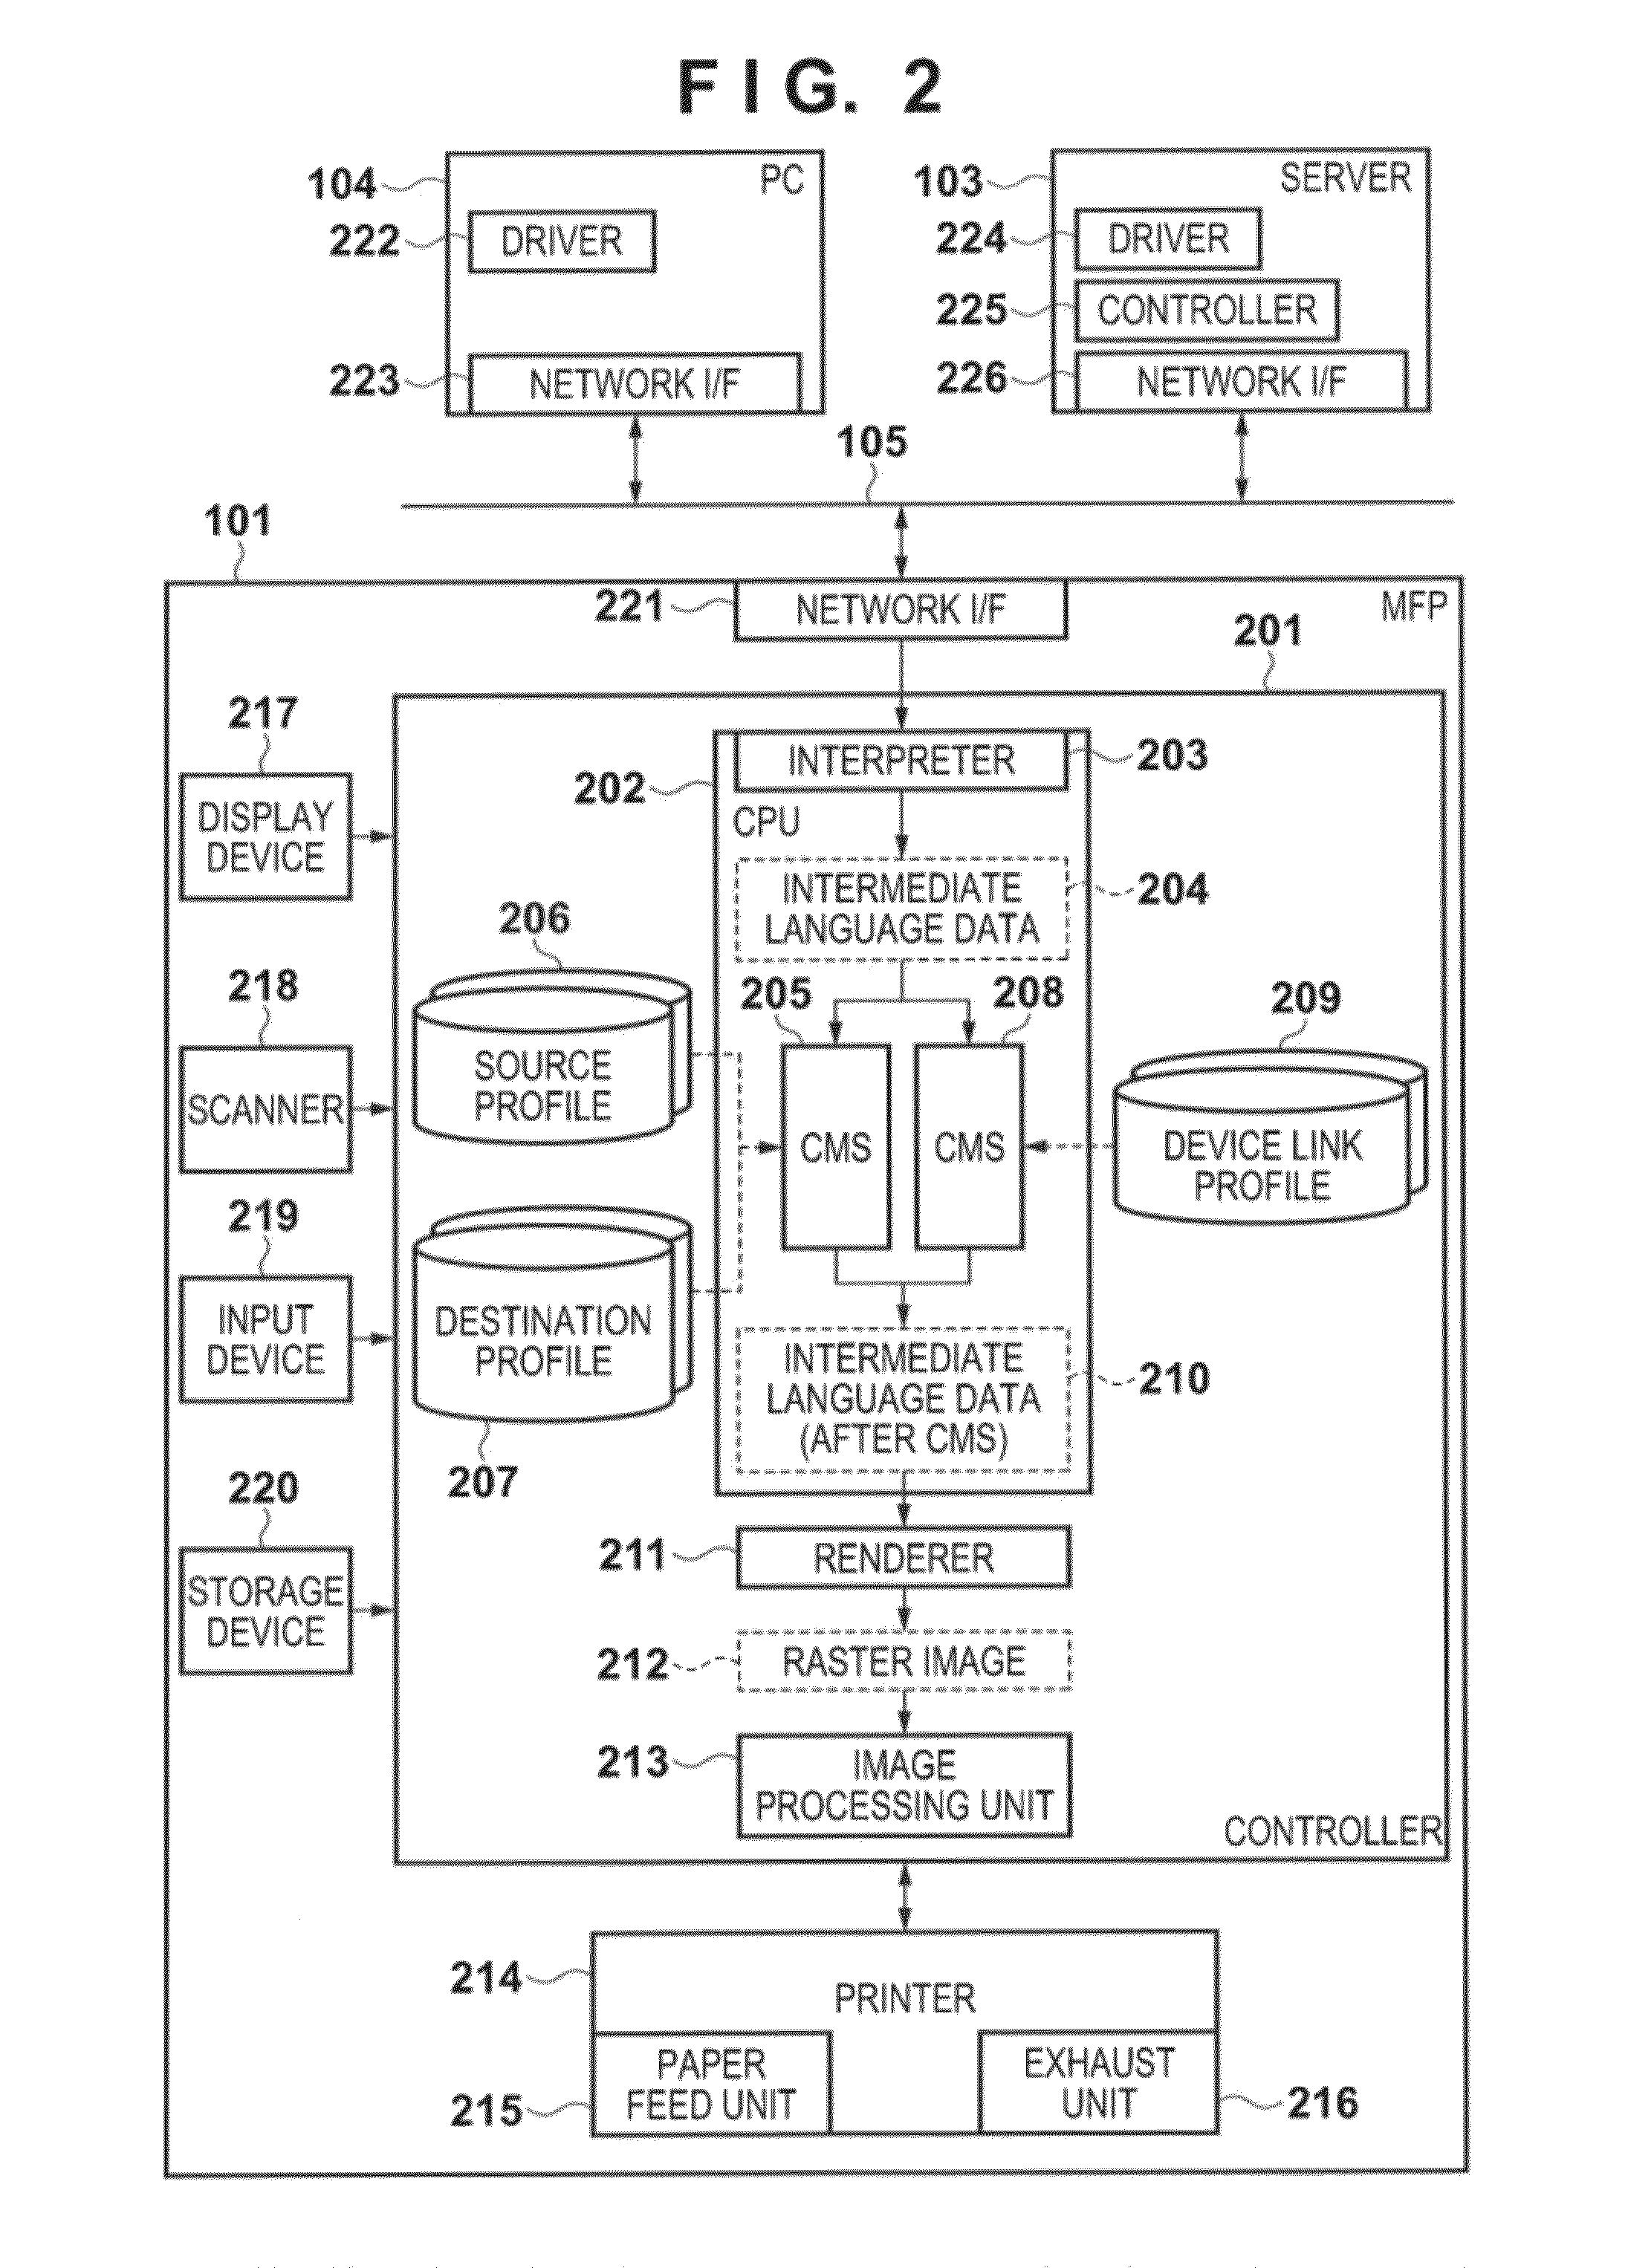 Image processing apparatus, image processing method, and storage medium for color matching